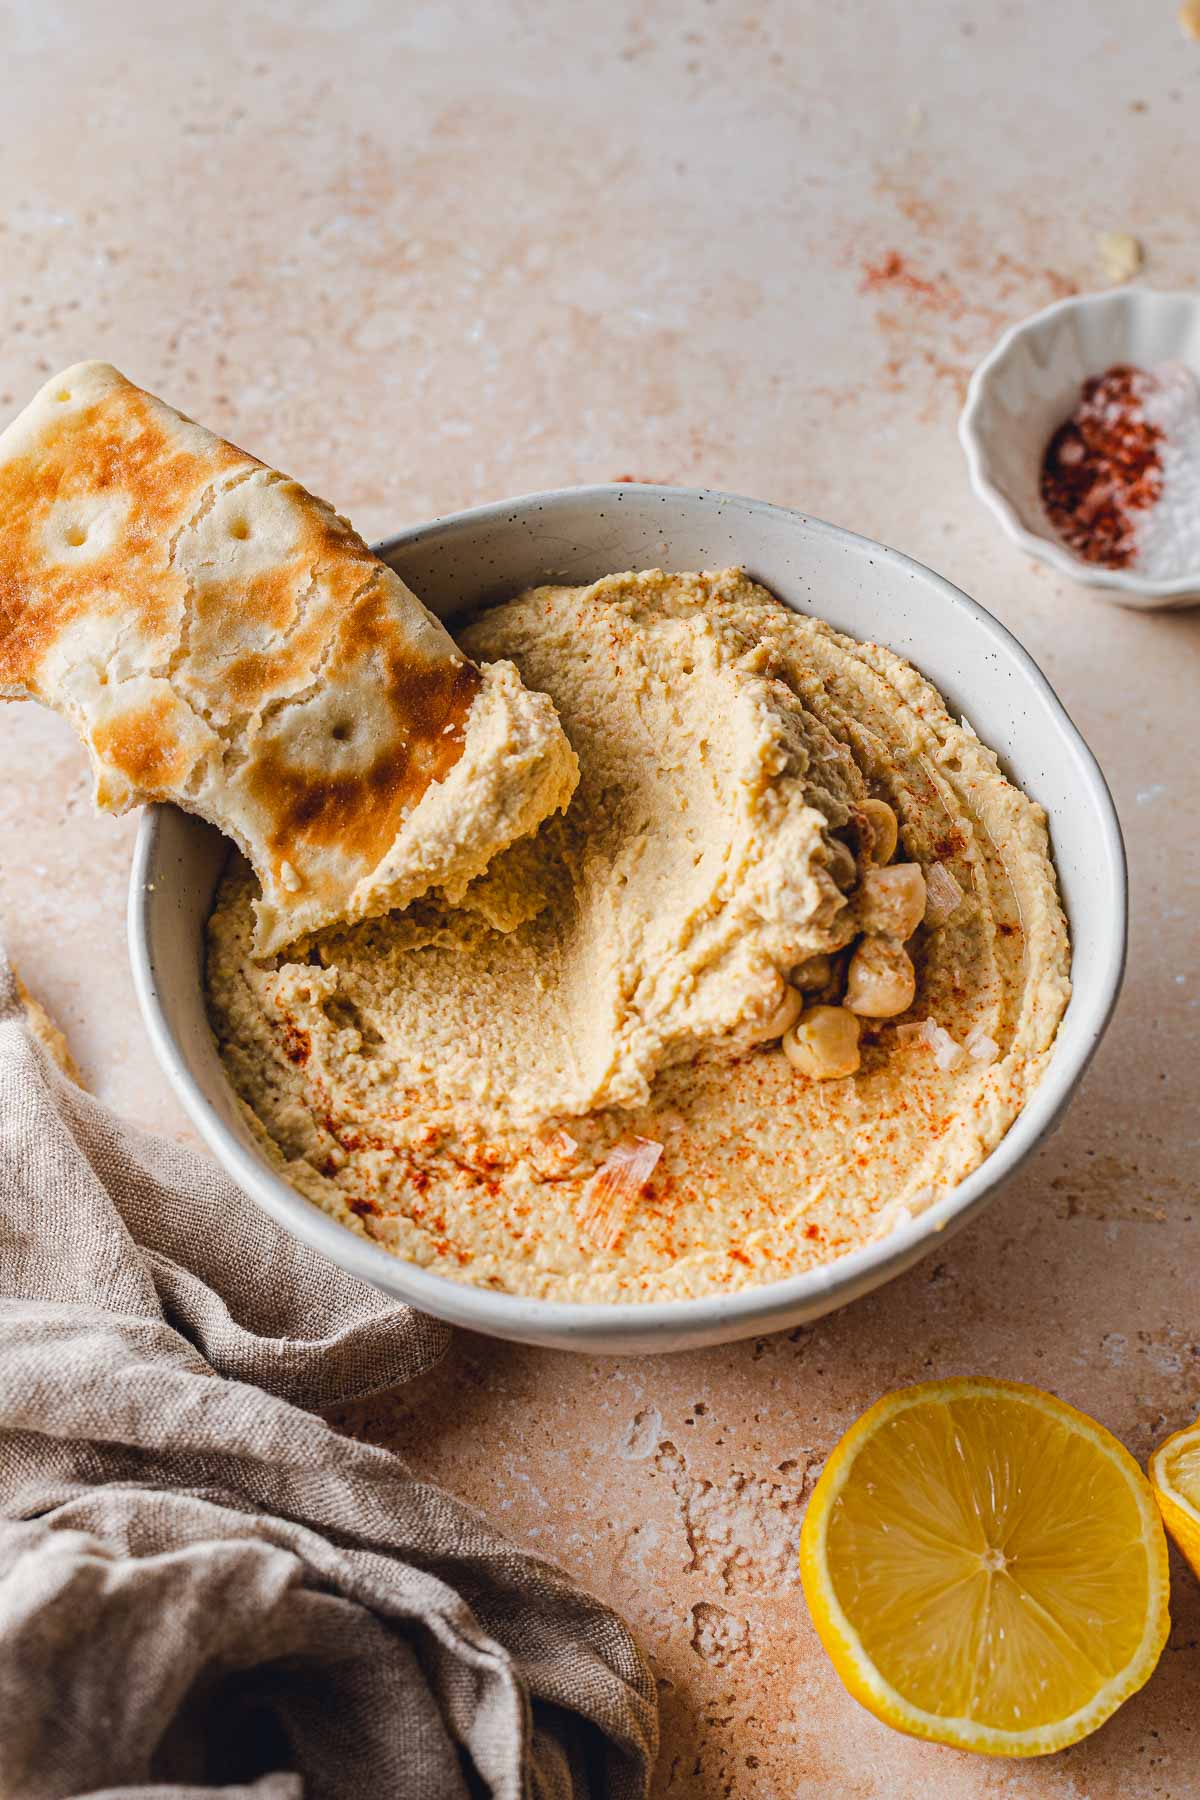 Hummus in a large bowl with a piece of bread placed in it.